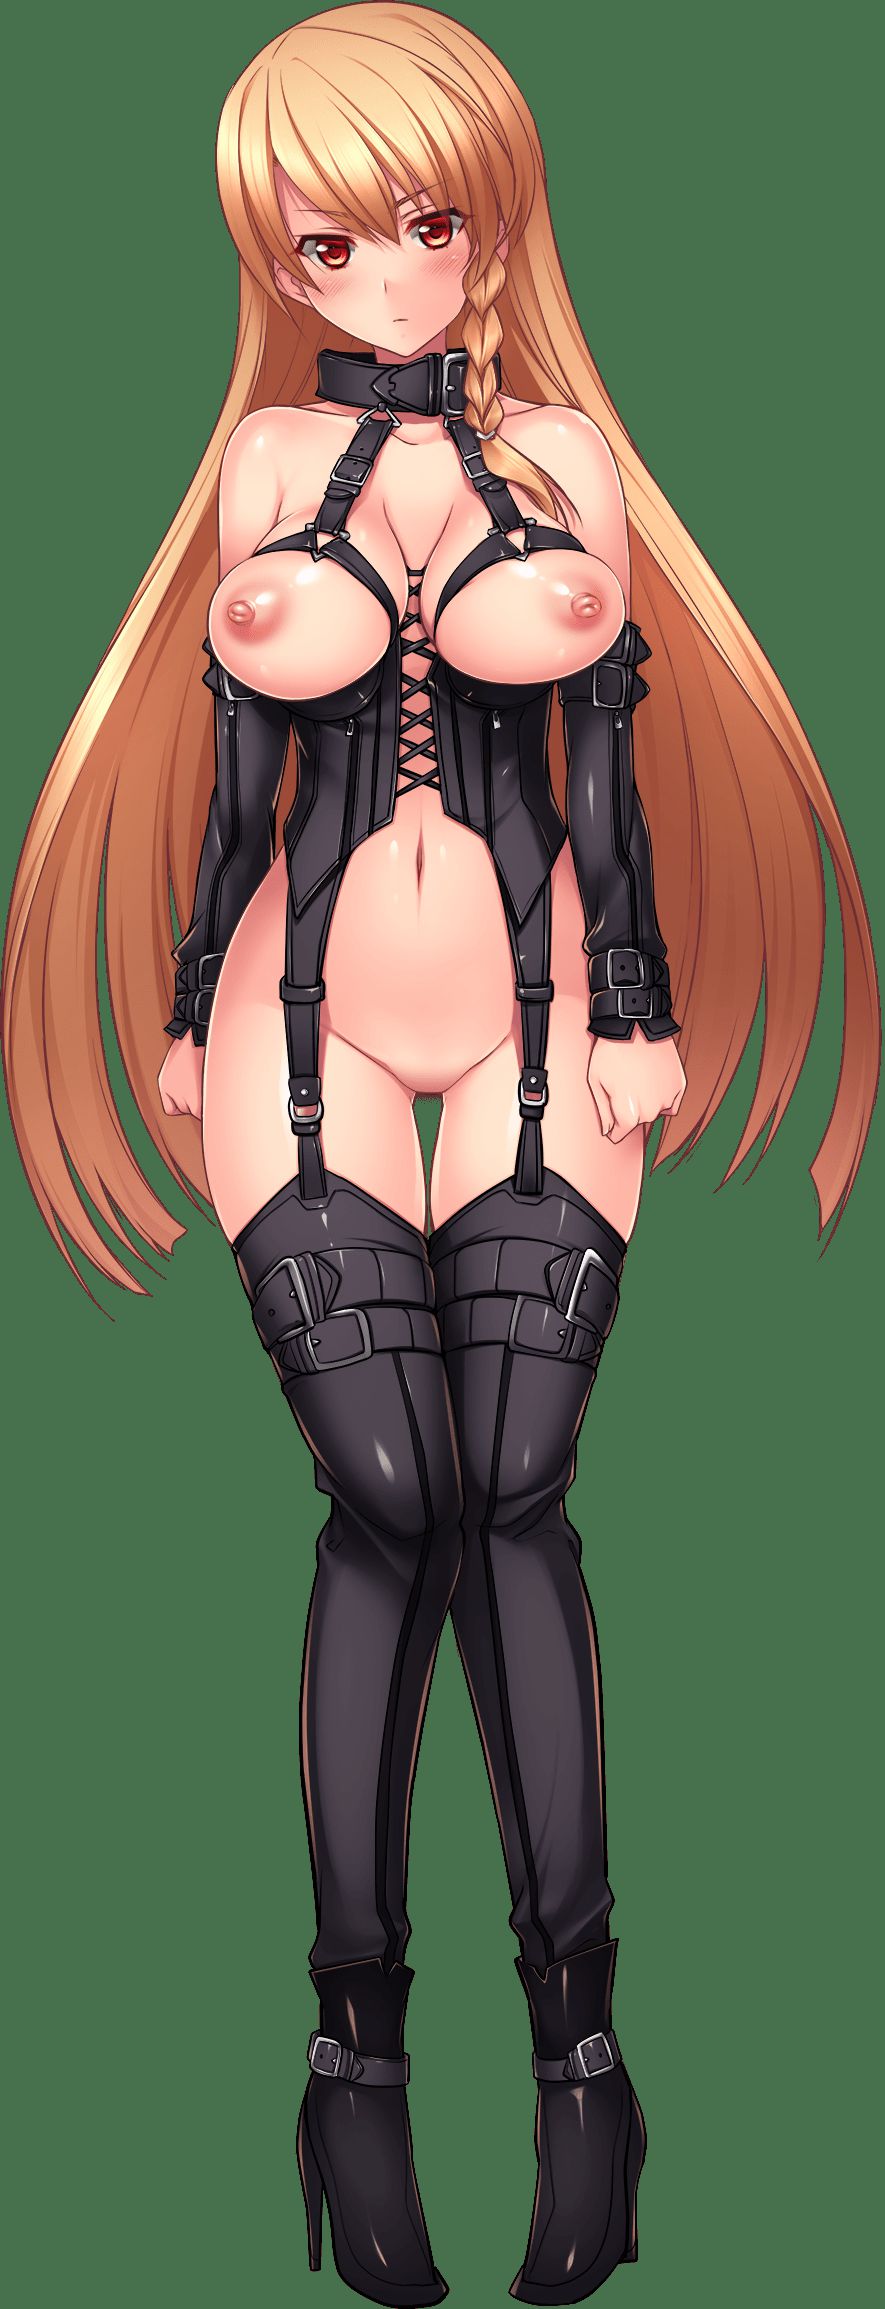 [Erotica character material] PNG background transmission erotic image such as anime character Part 314 14